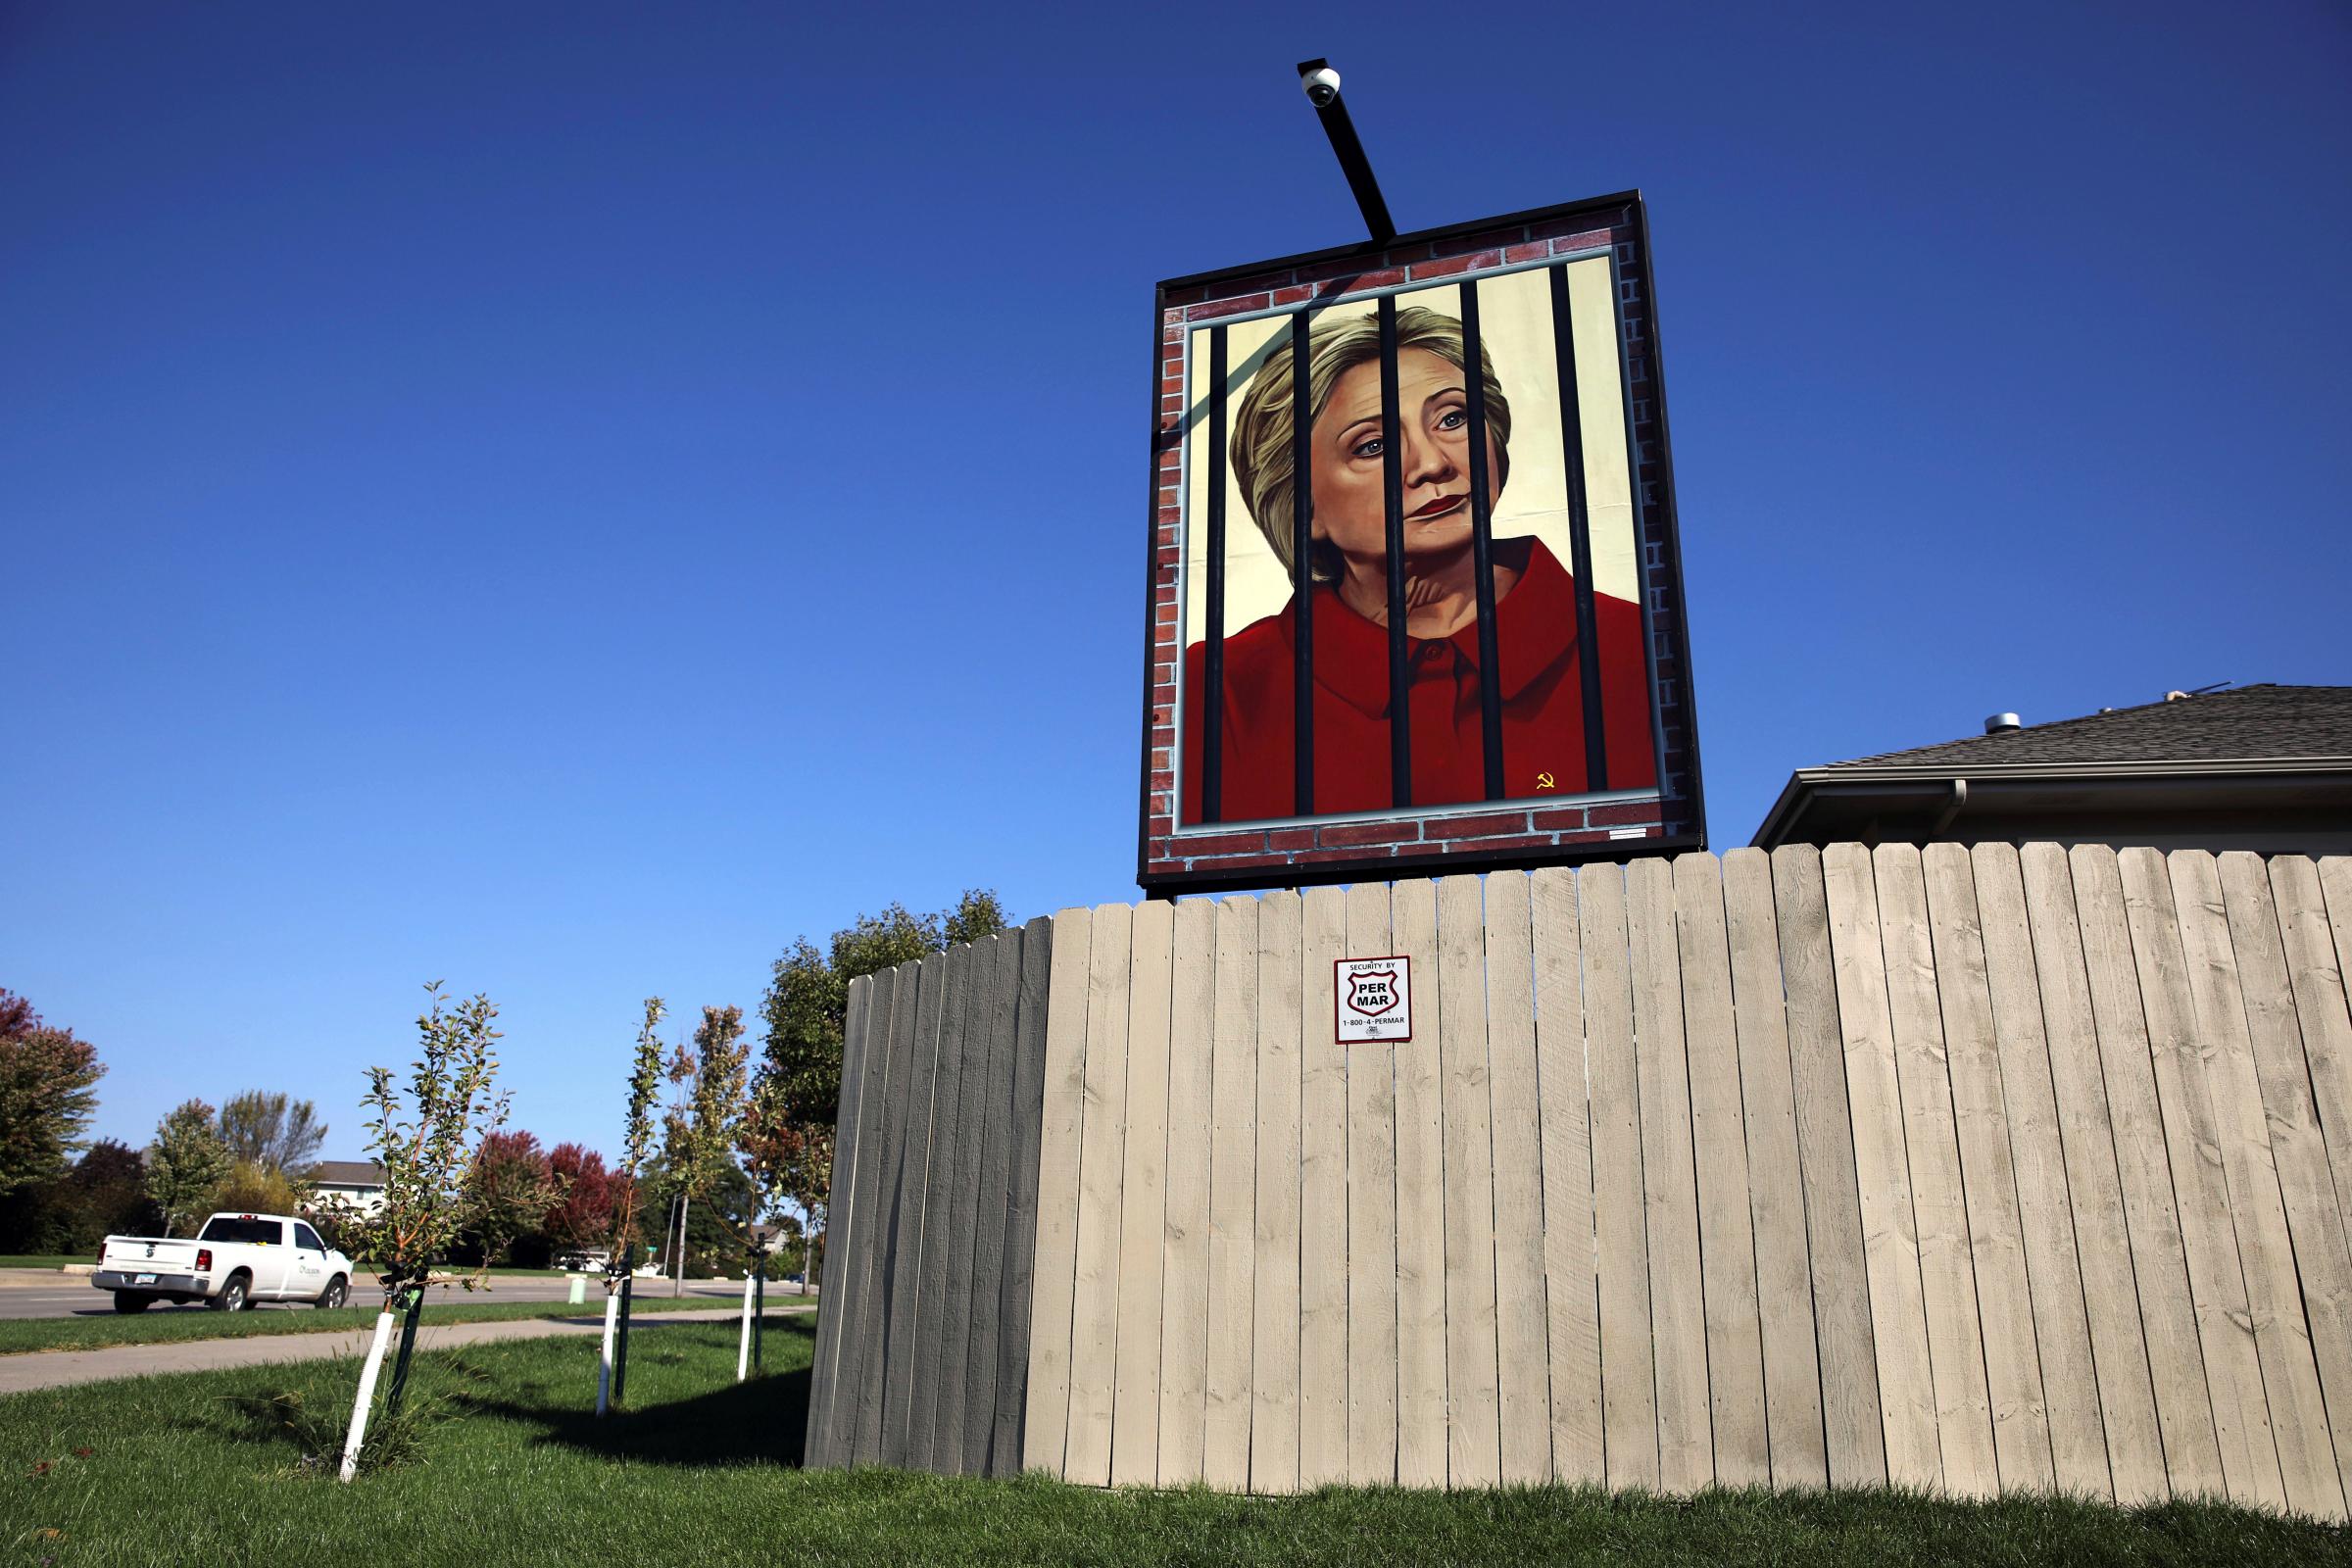 A poster depicting U.S. Democratic presidential candidate Hillary Clinton behind bars hangs in the yard of George Davey in West Des Moines, Iowa